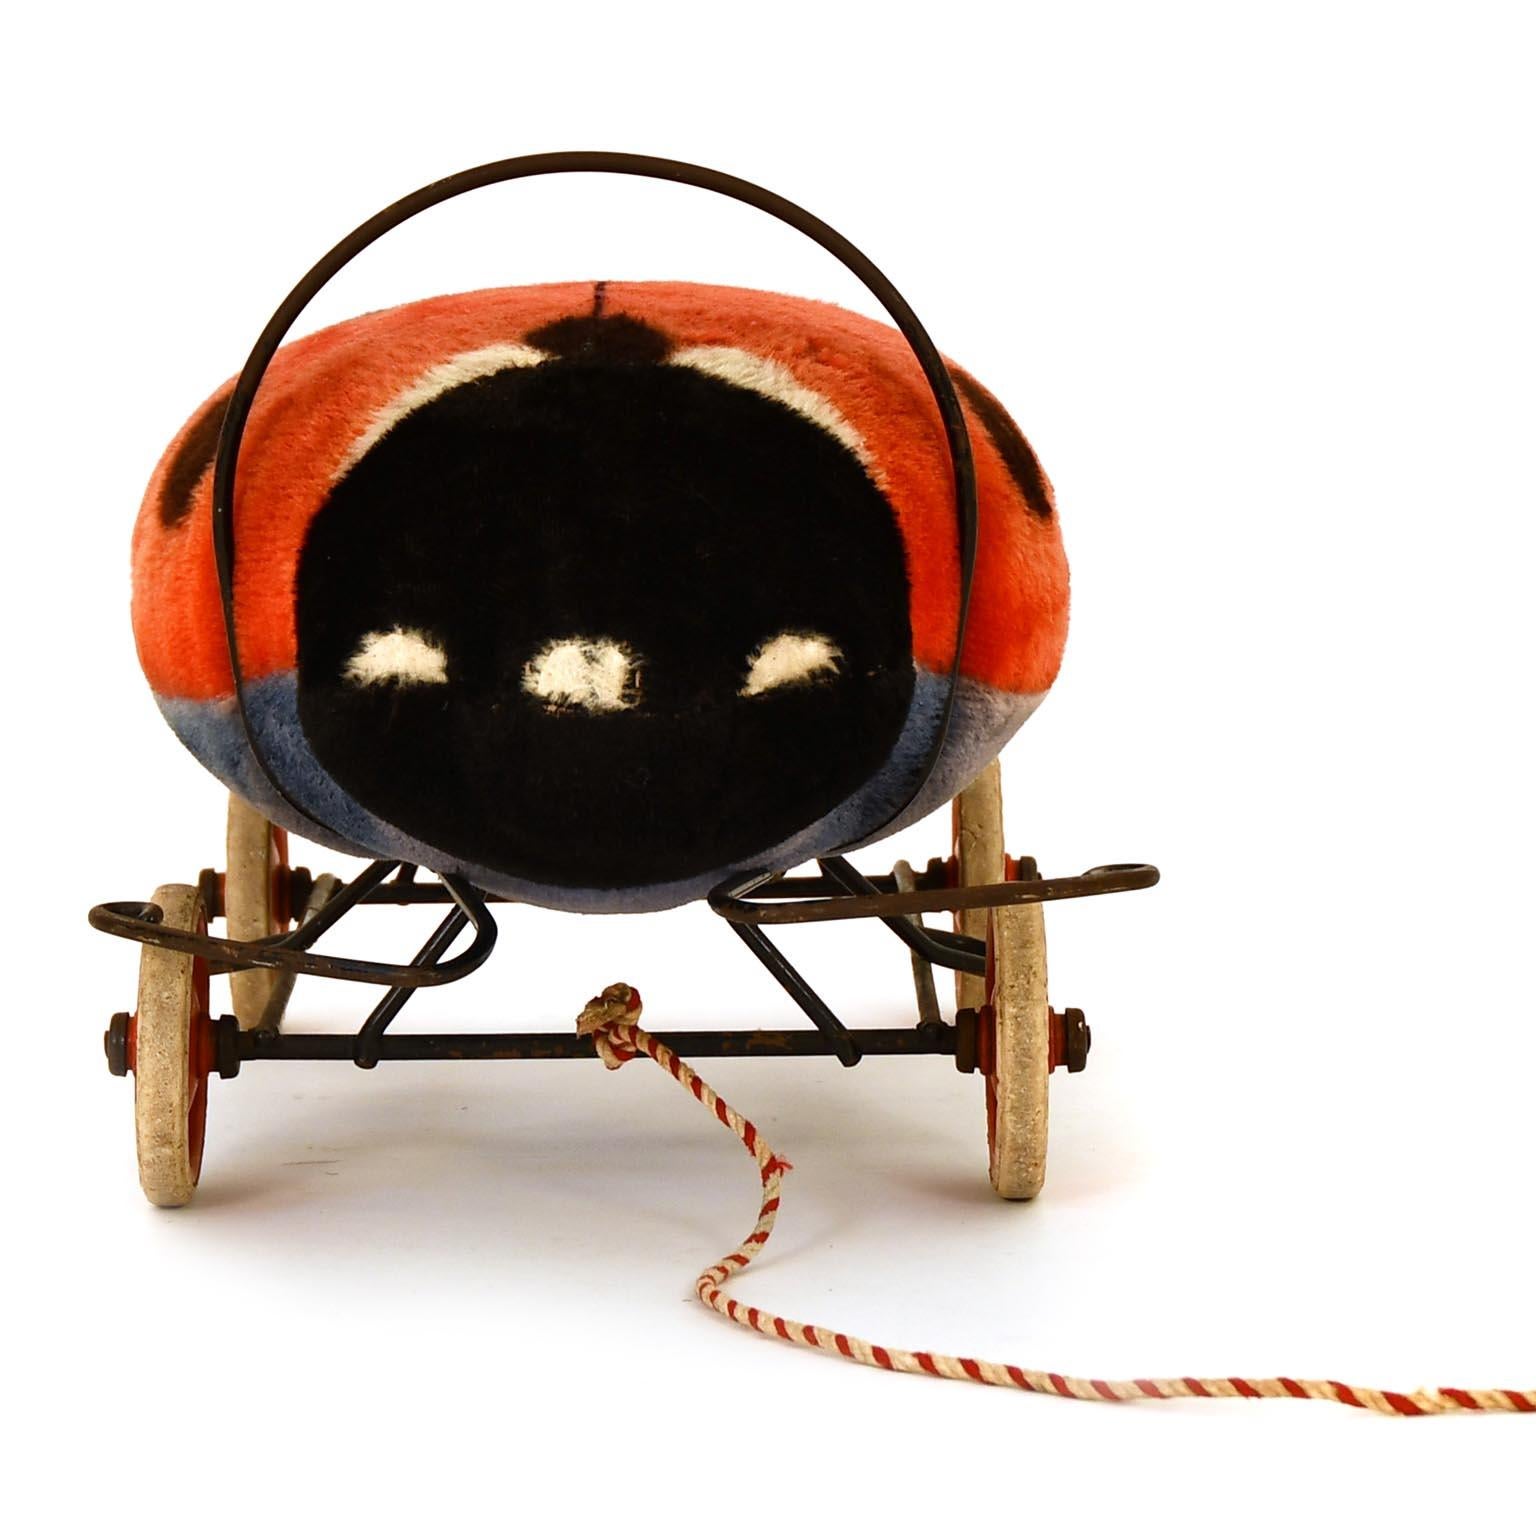 If you like to have a friend in your room, even you are not anymore a child. This cute Ladybird made by Margarete Steiff will be perfect for you. Just sit down, or if you can and like move through your rooms.
The ladybird is fixed on a metal base